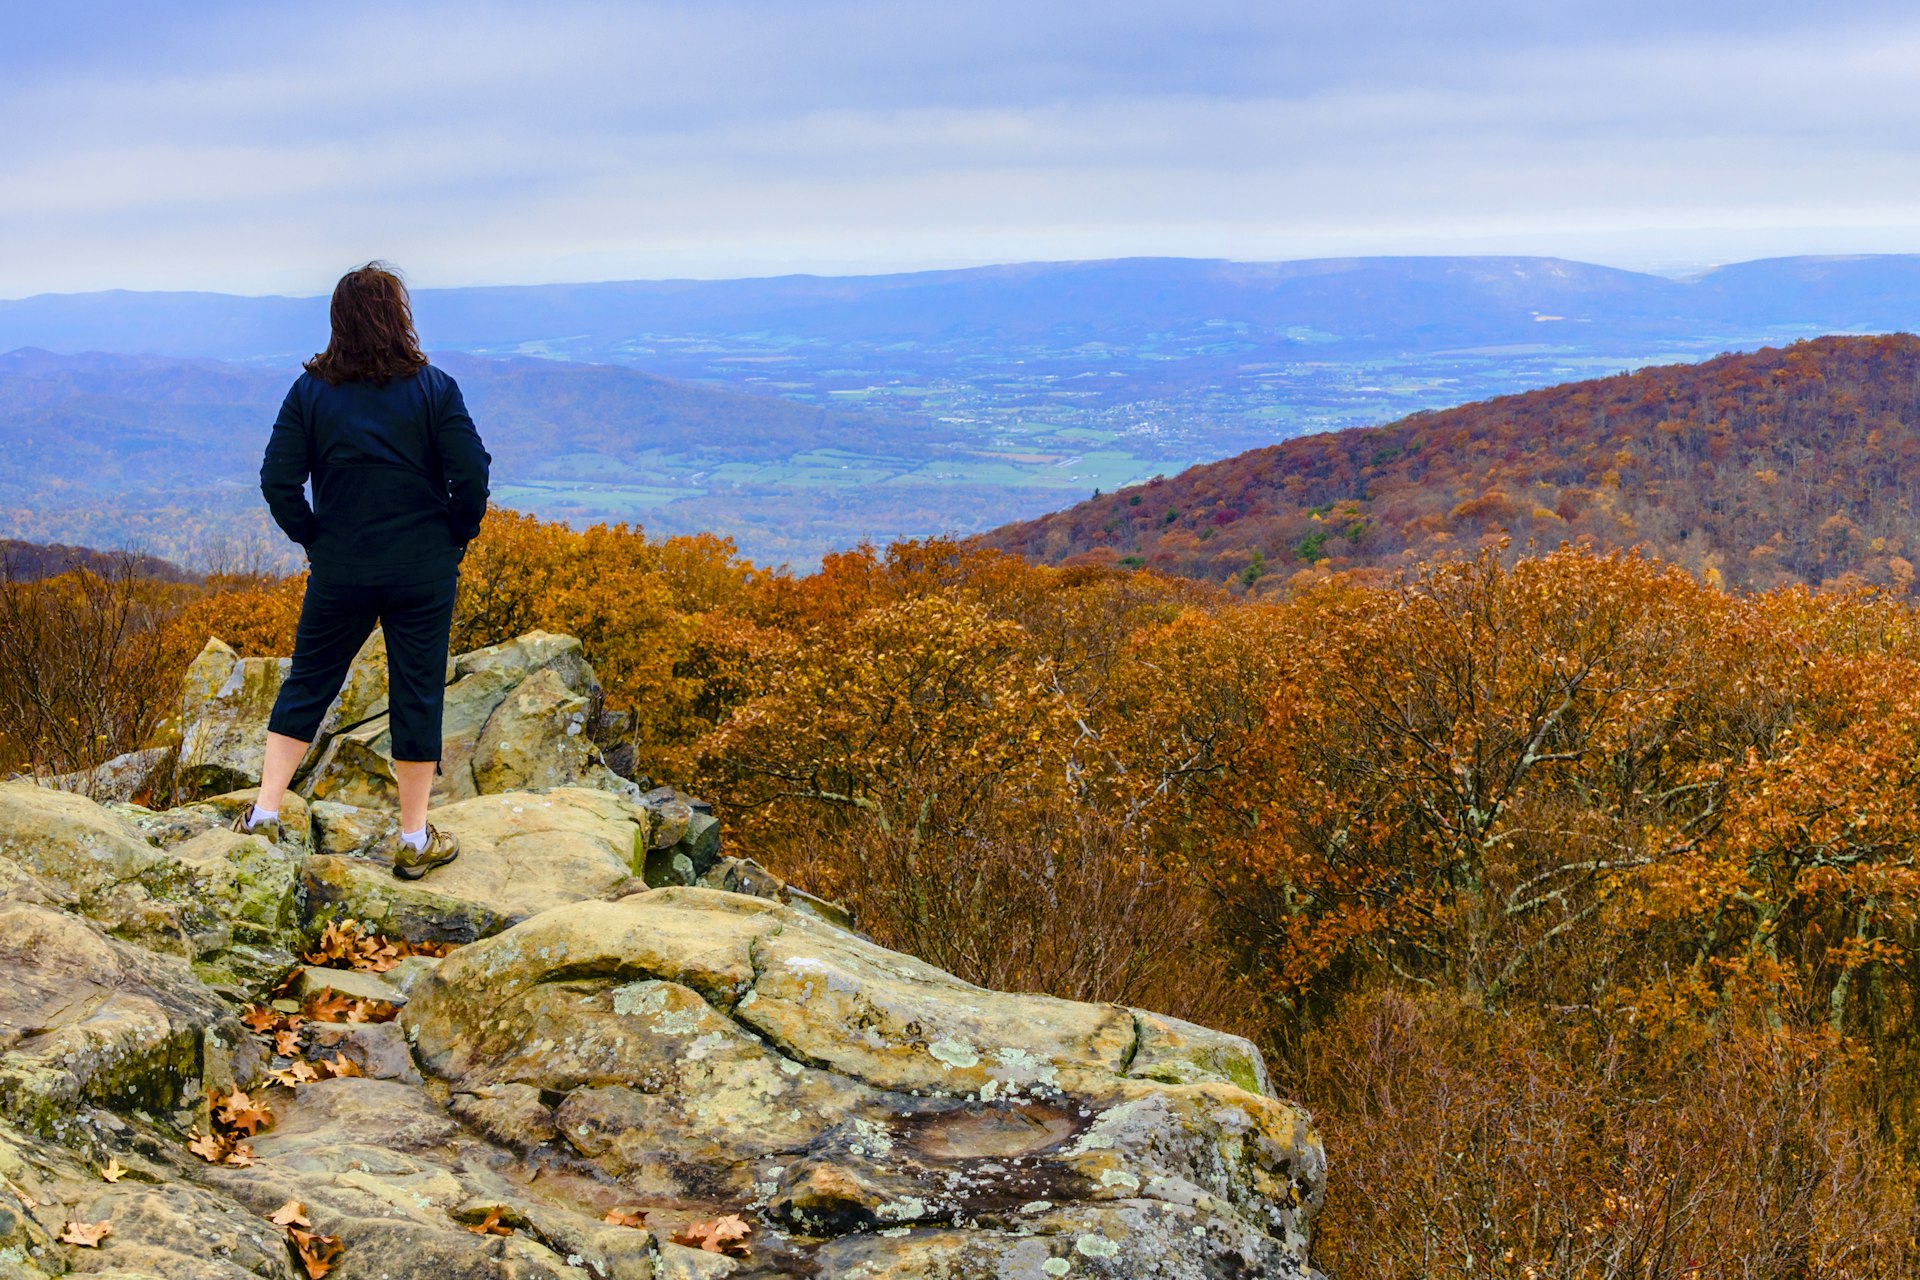 A woman stands on a rocky outcropping overlooking fall foliage in Shenandoah National Park